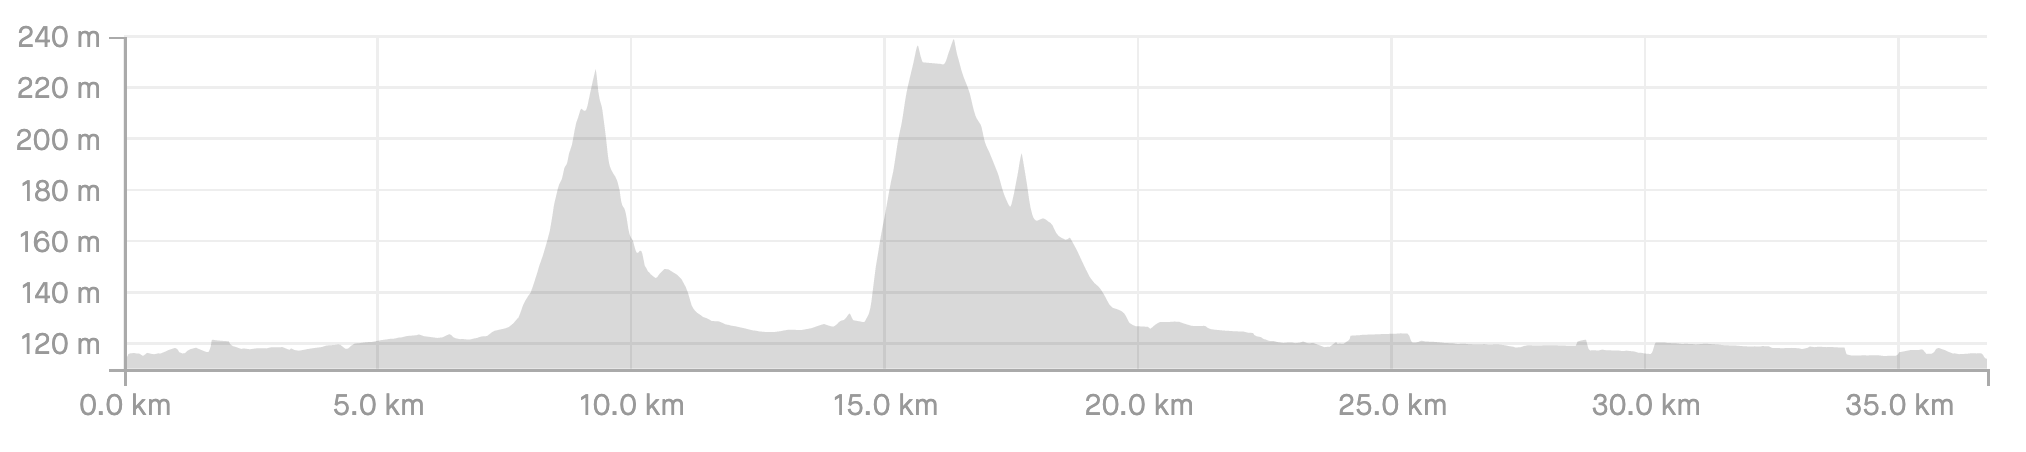 Image 9 - Route elevation profile on Strava (image by author)